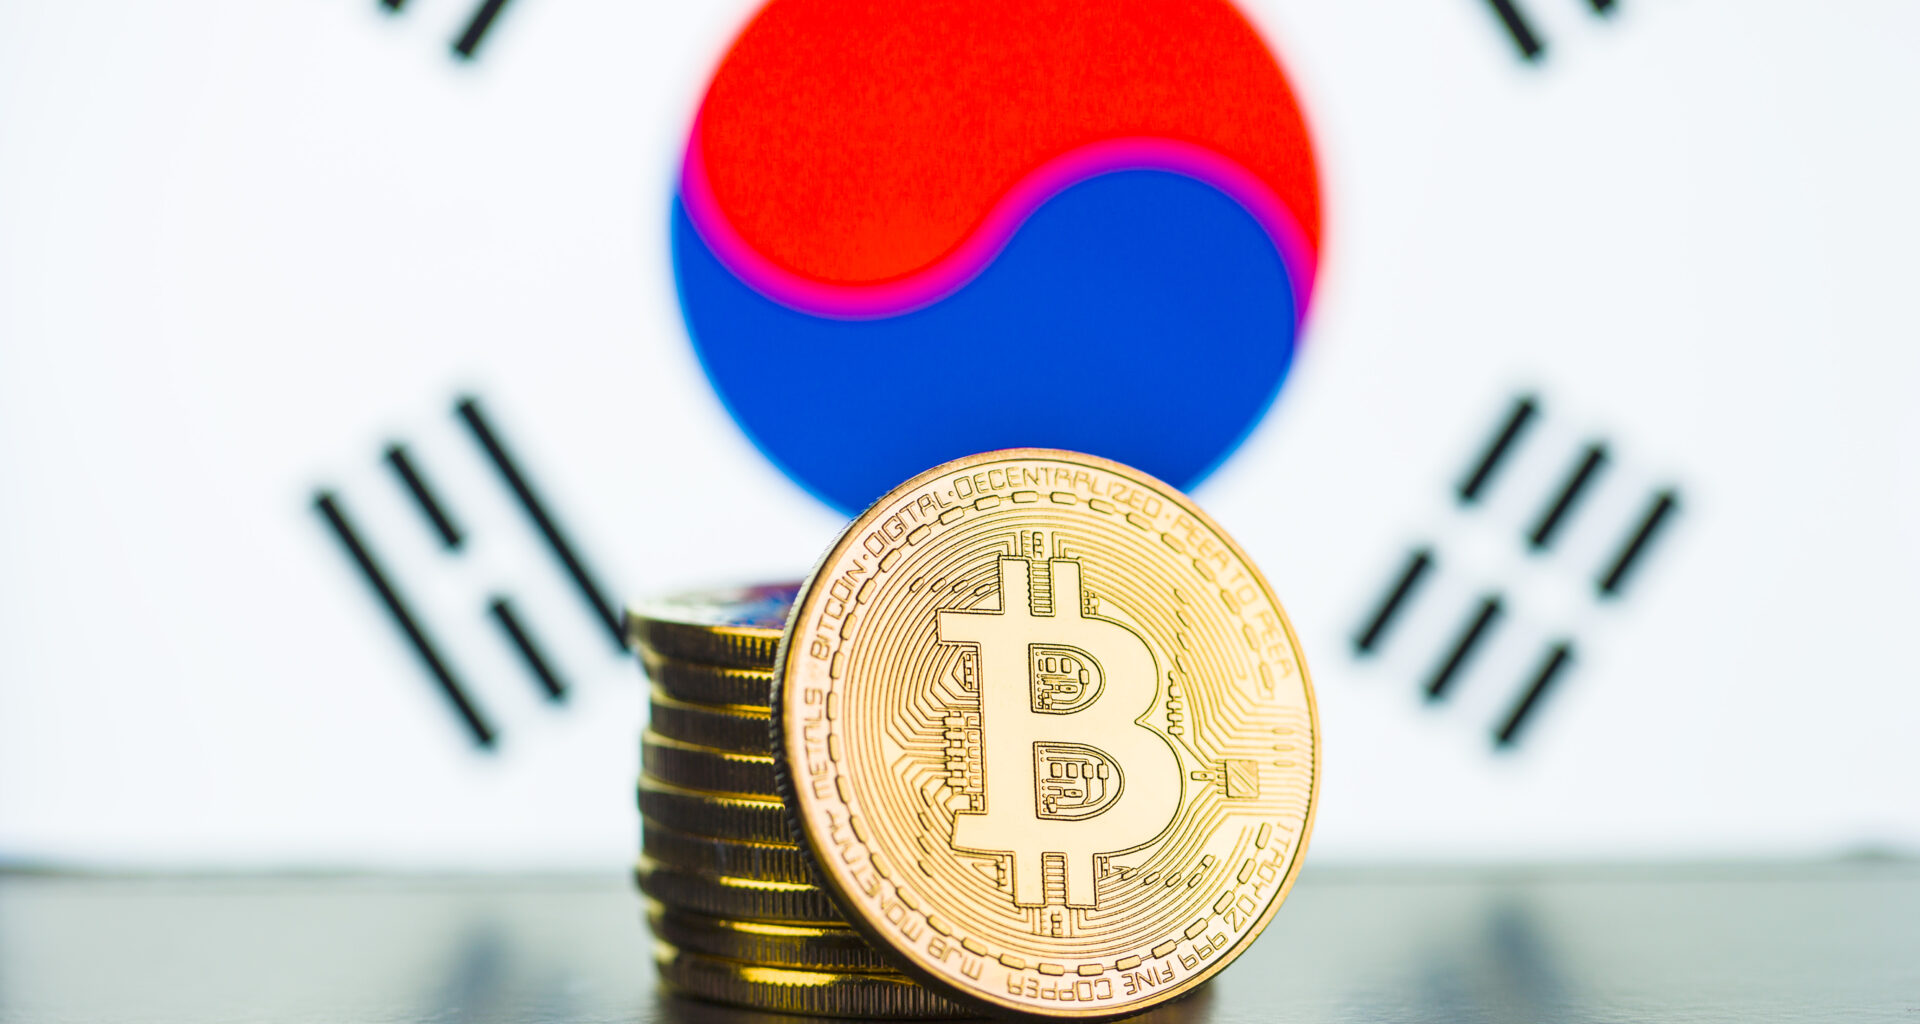 A stack of golden coins with the bitcoin logo embossed on it, in front of the South Korean flag.